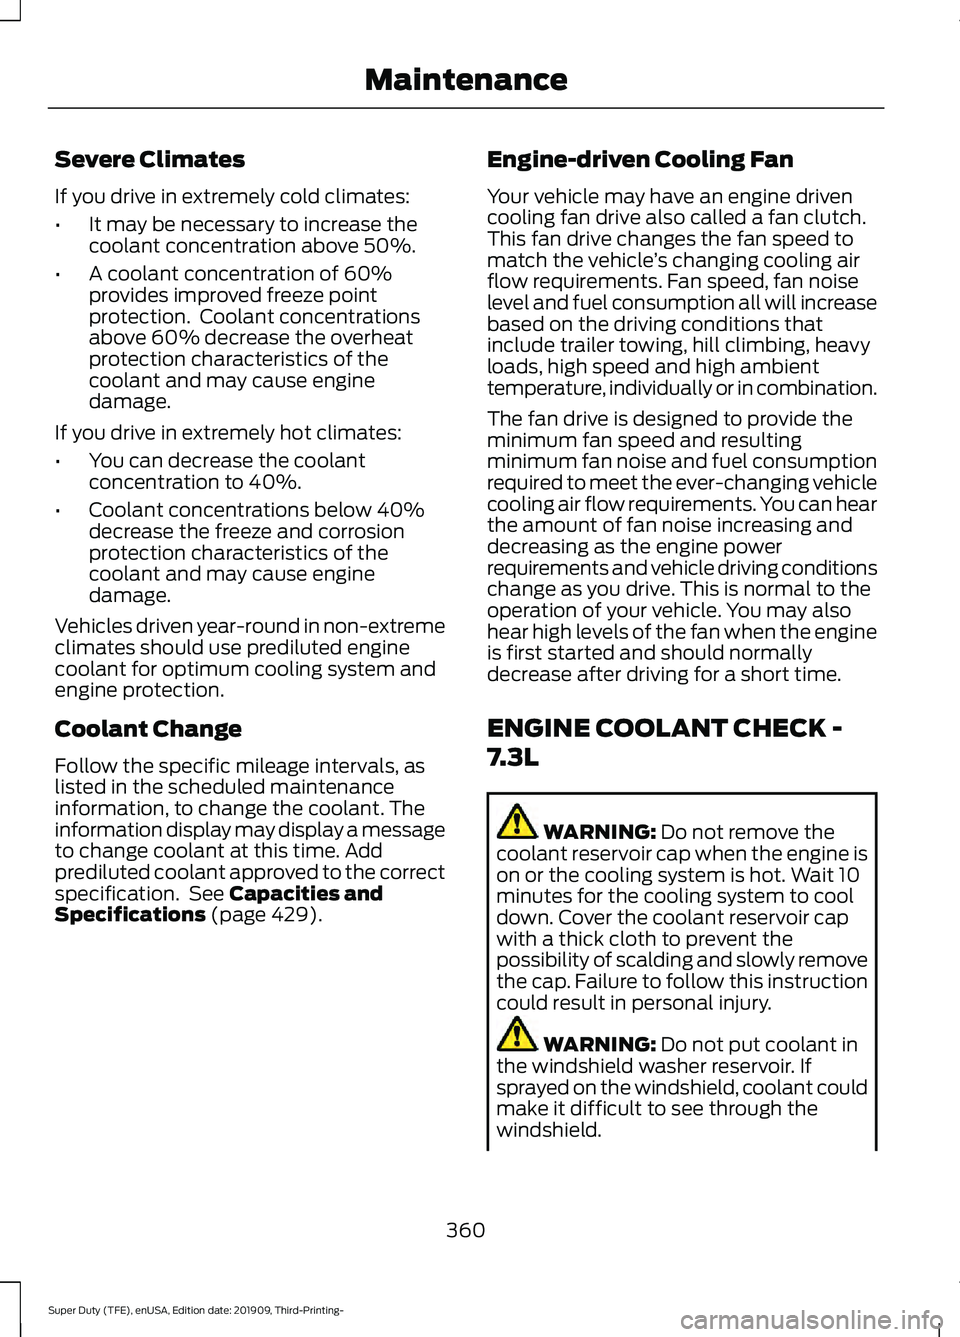 FORD F-450 2020  Owners Manual Severe Climates
If you drive in extremely cold climates:
•
It may be necessary to increase the
coolant concentration above 50%.
• A coolant concentration of 60%
provides improved freeze point
prot